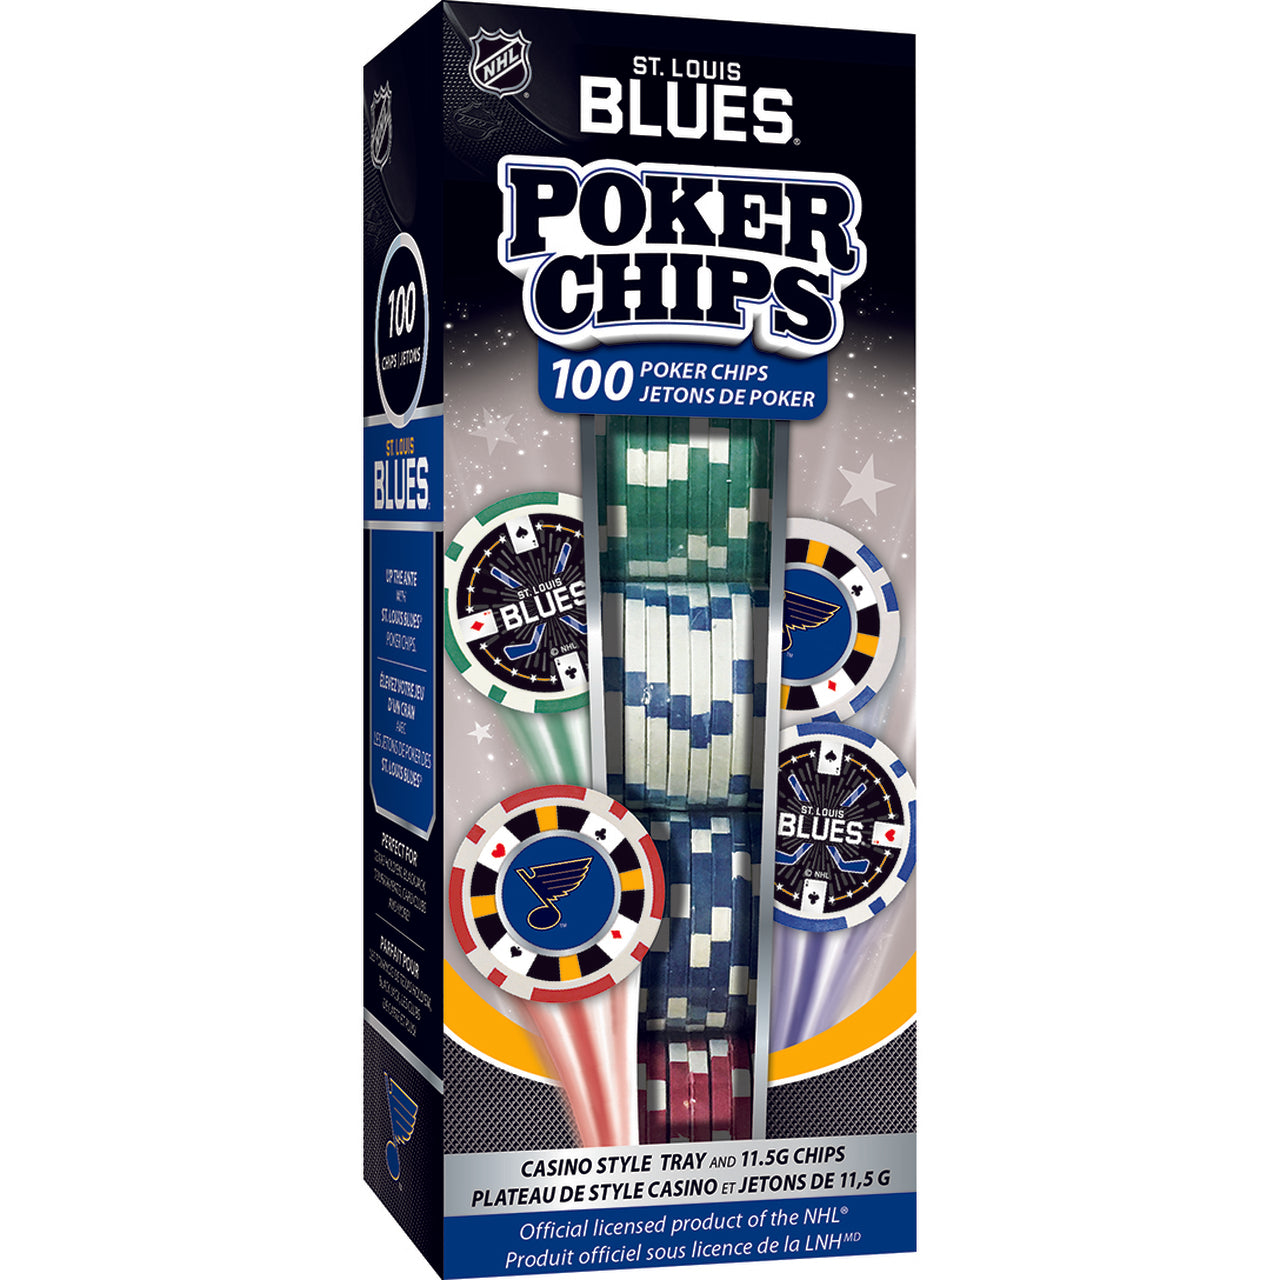 St. Louis Blues Poker Chips 100 Piece Set by Masterpieces